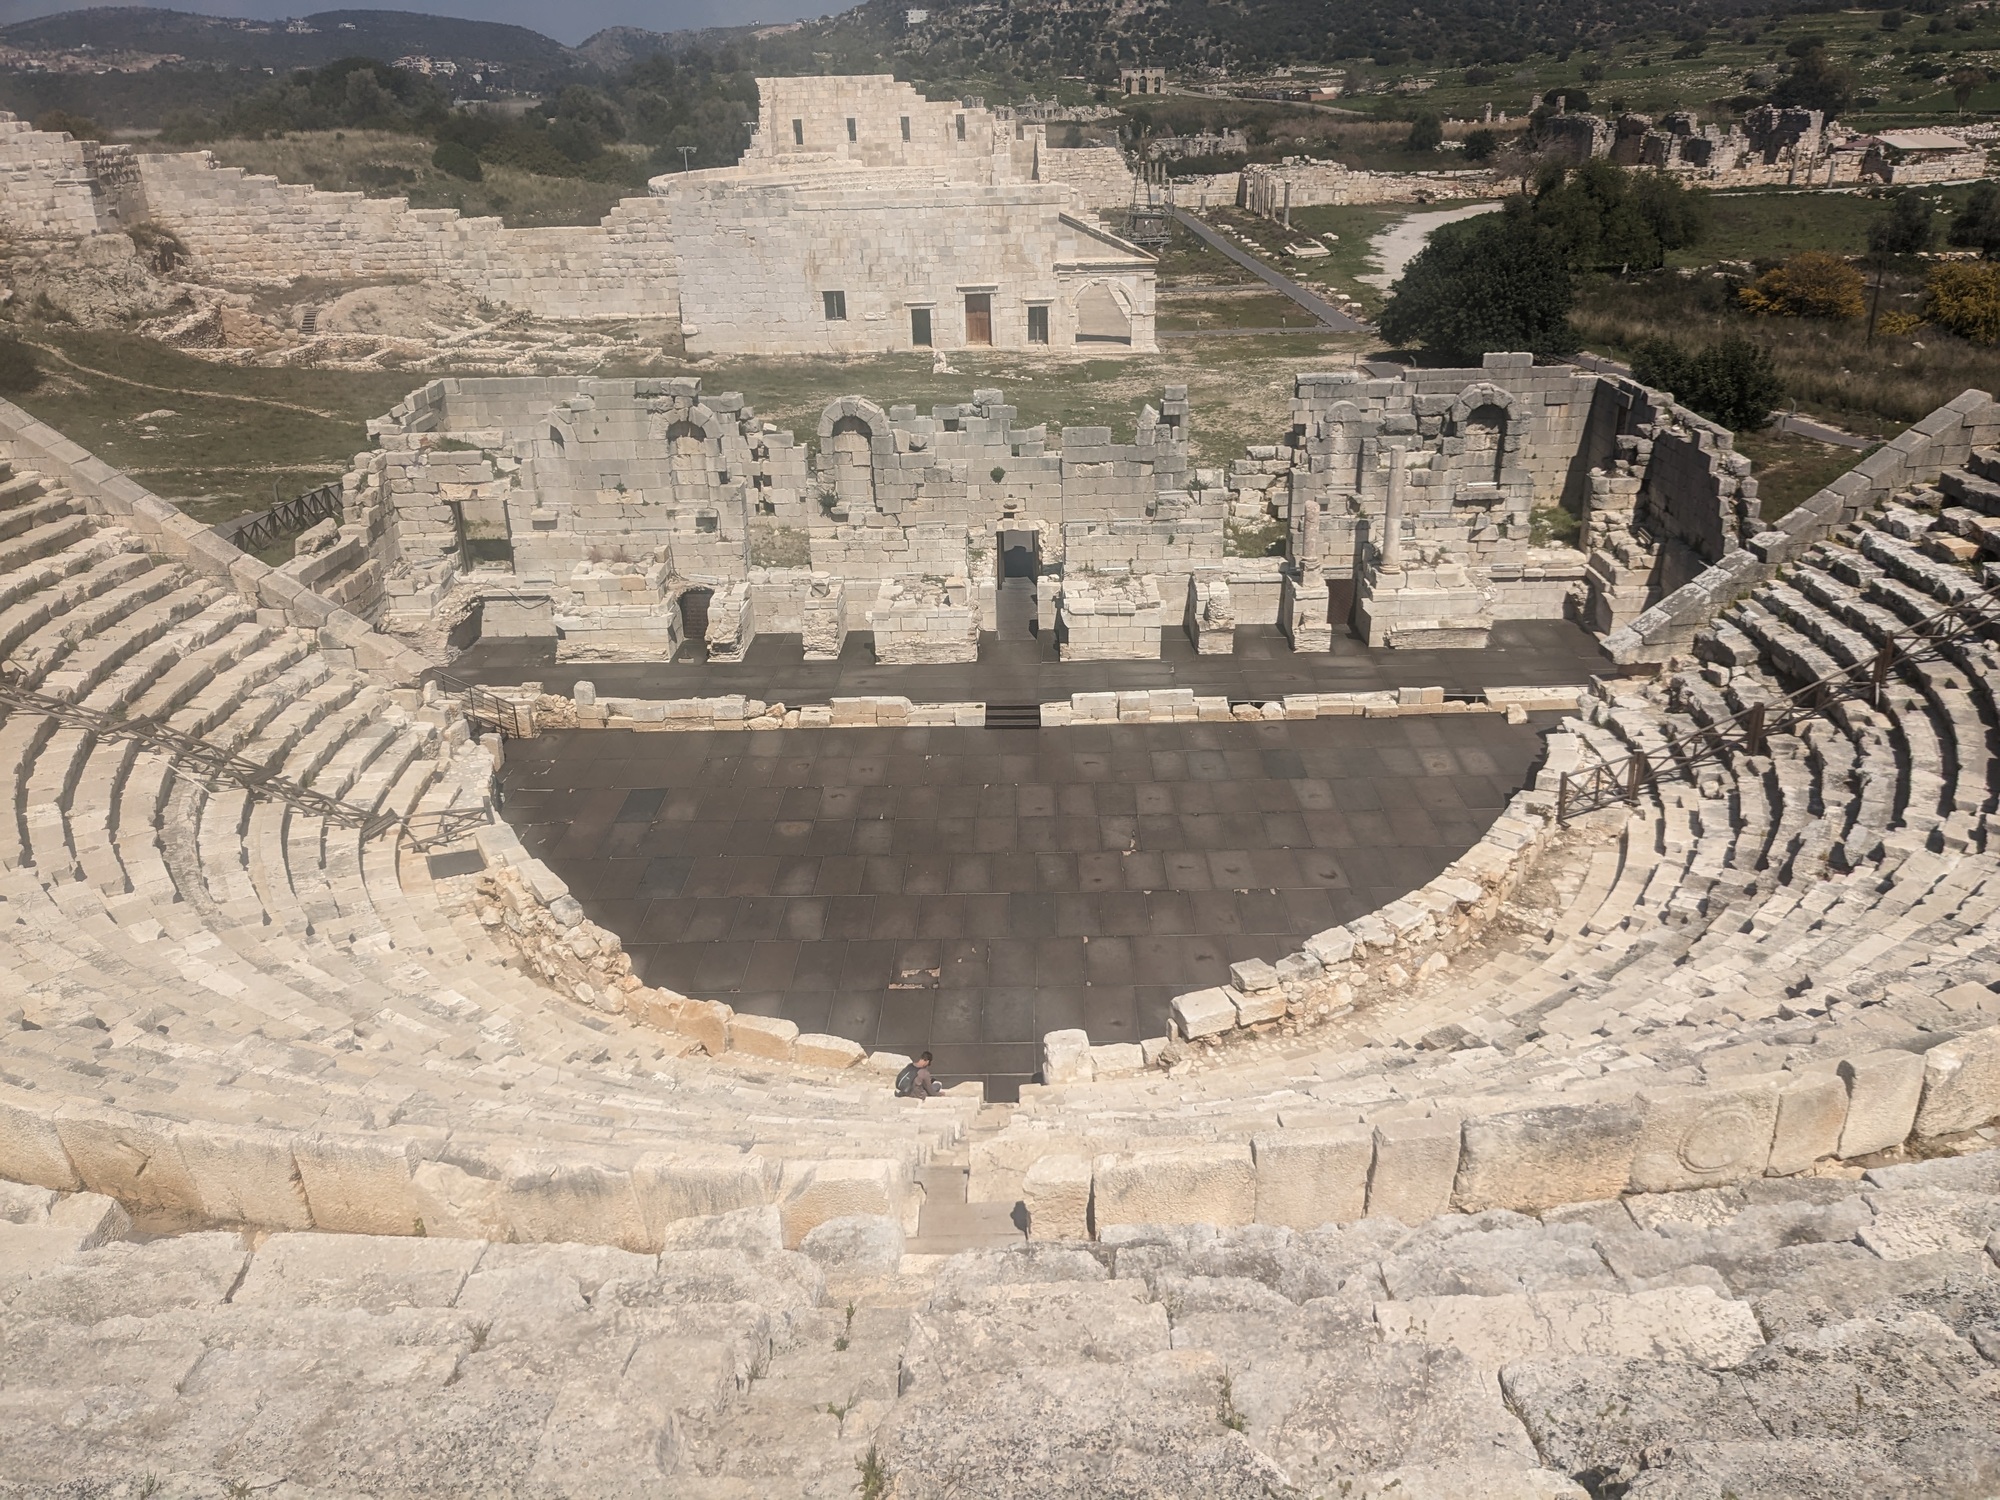 Amphitheater in the ancient city of Patara